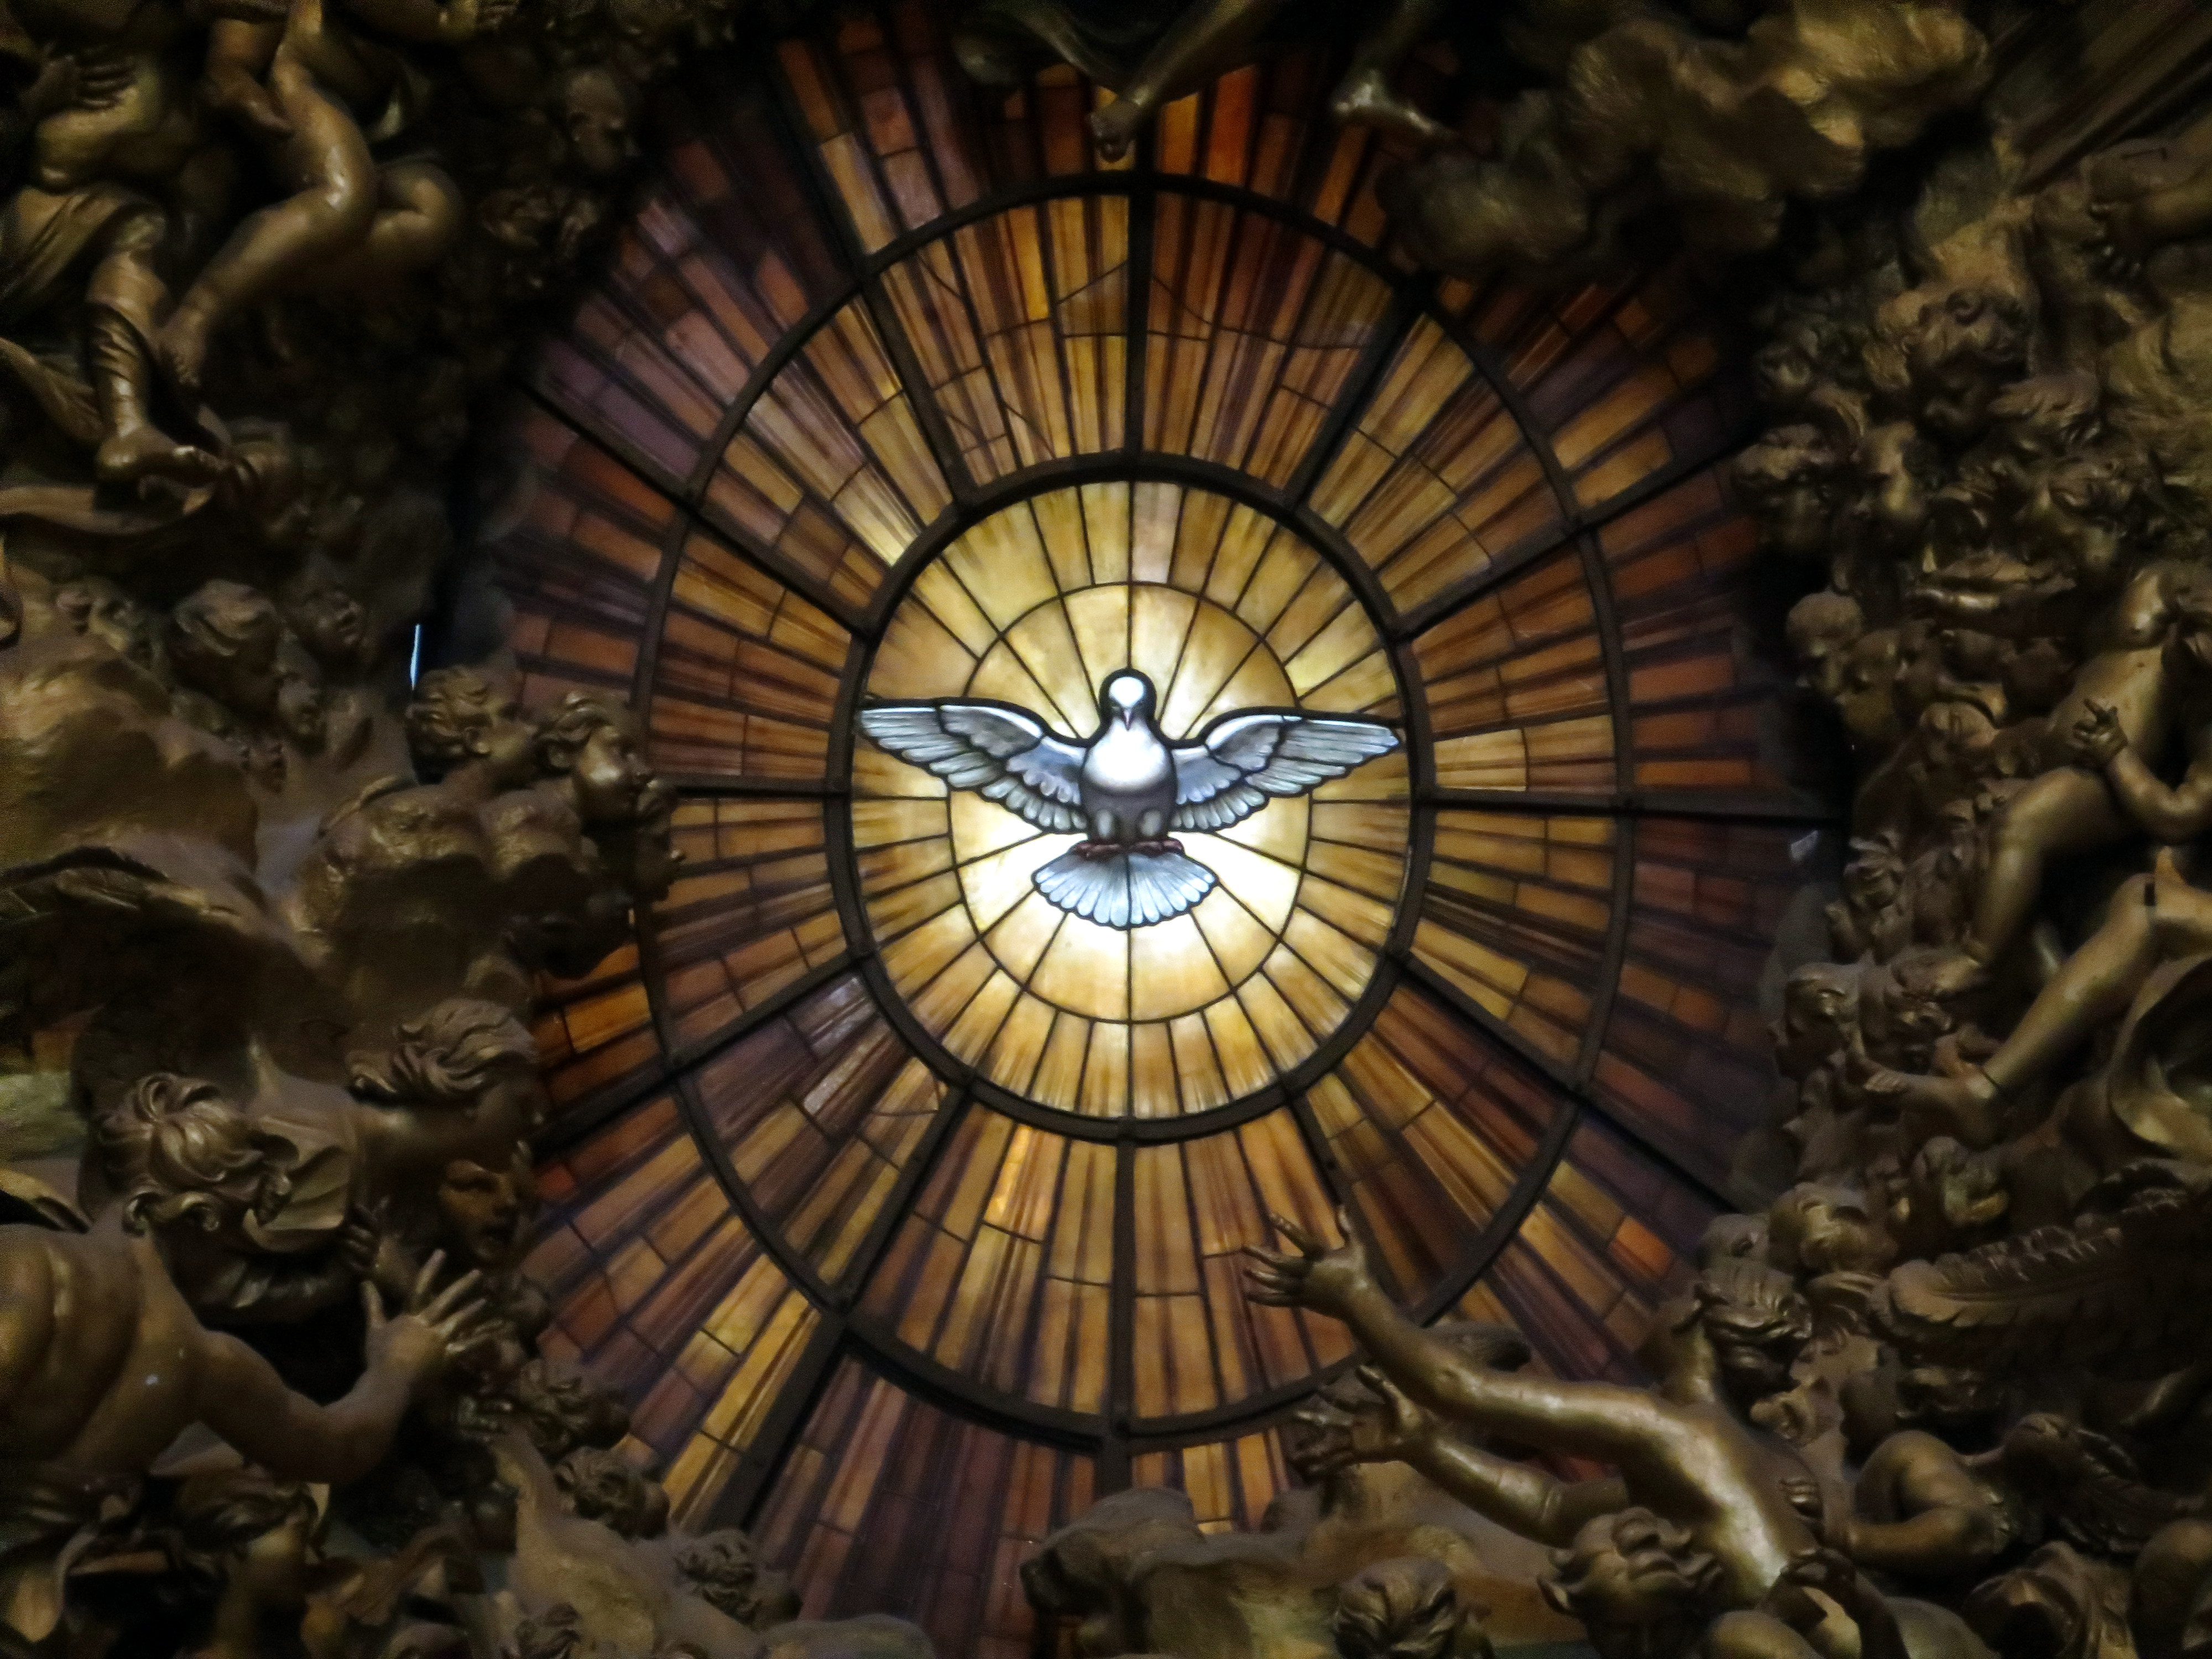 Dove of the Holy Spirit in Saint Peter's Basilica